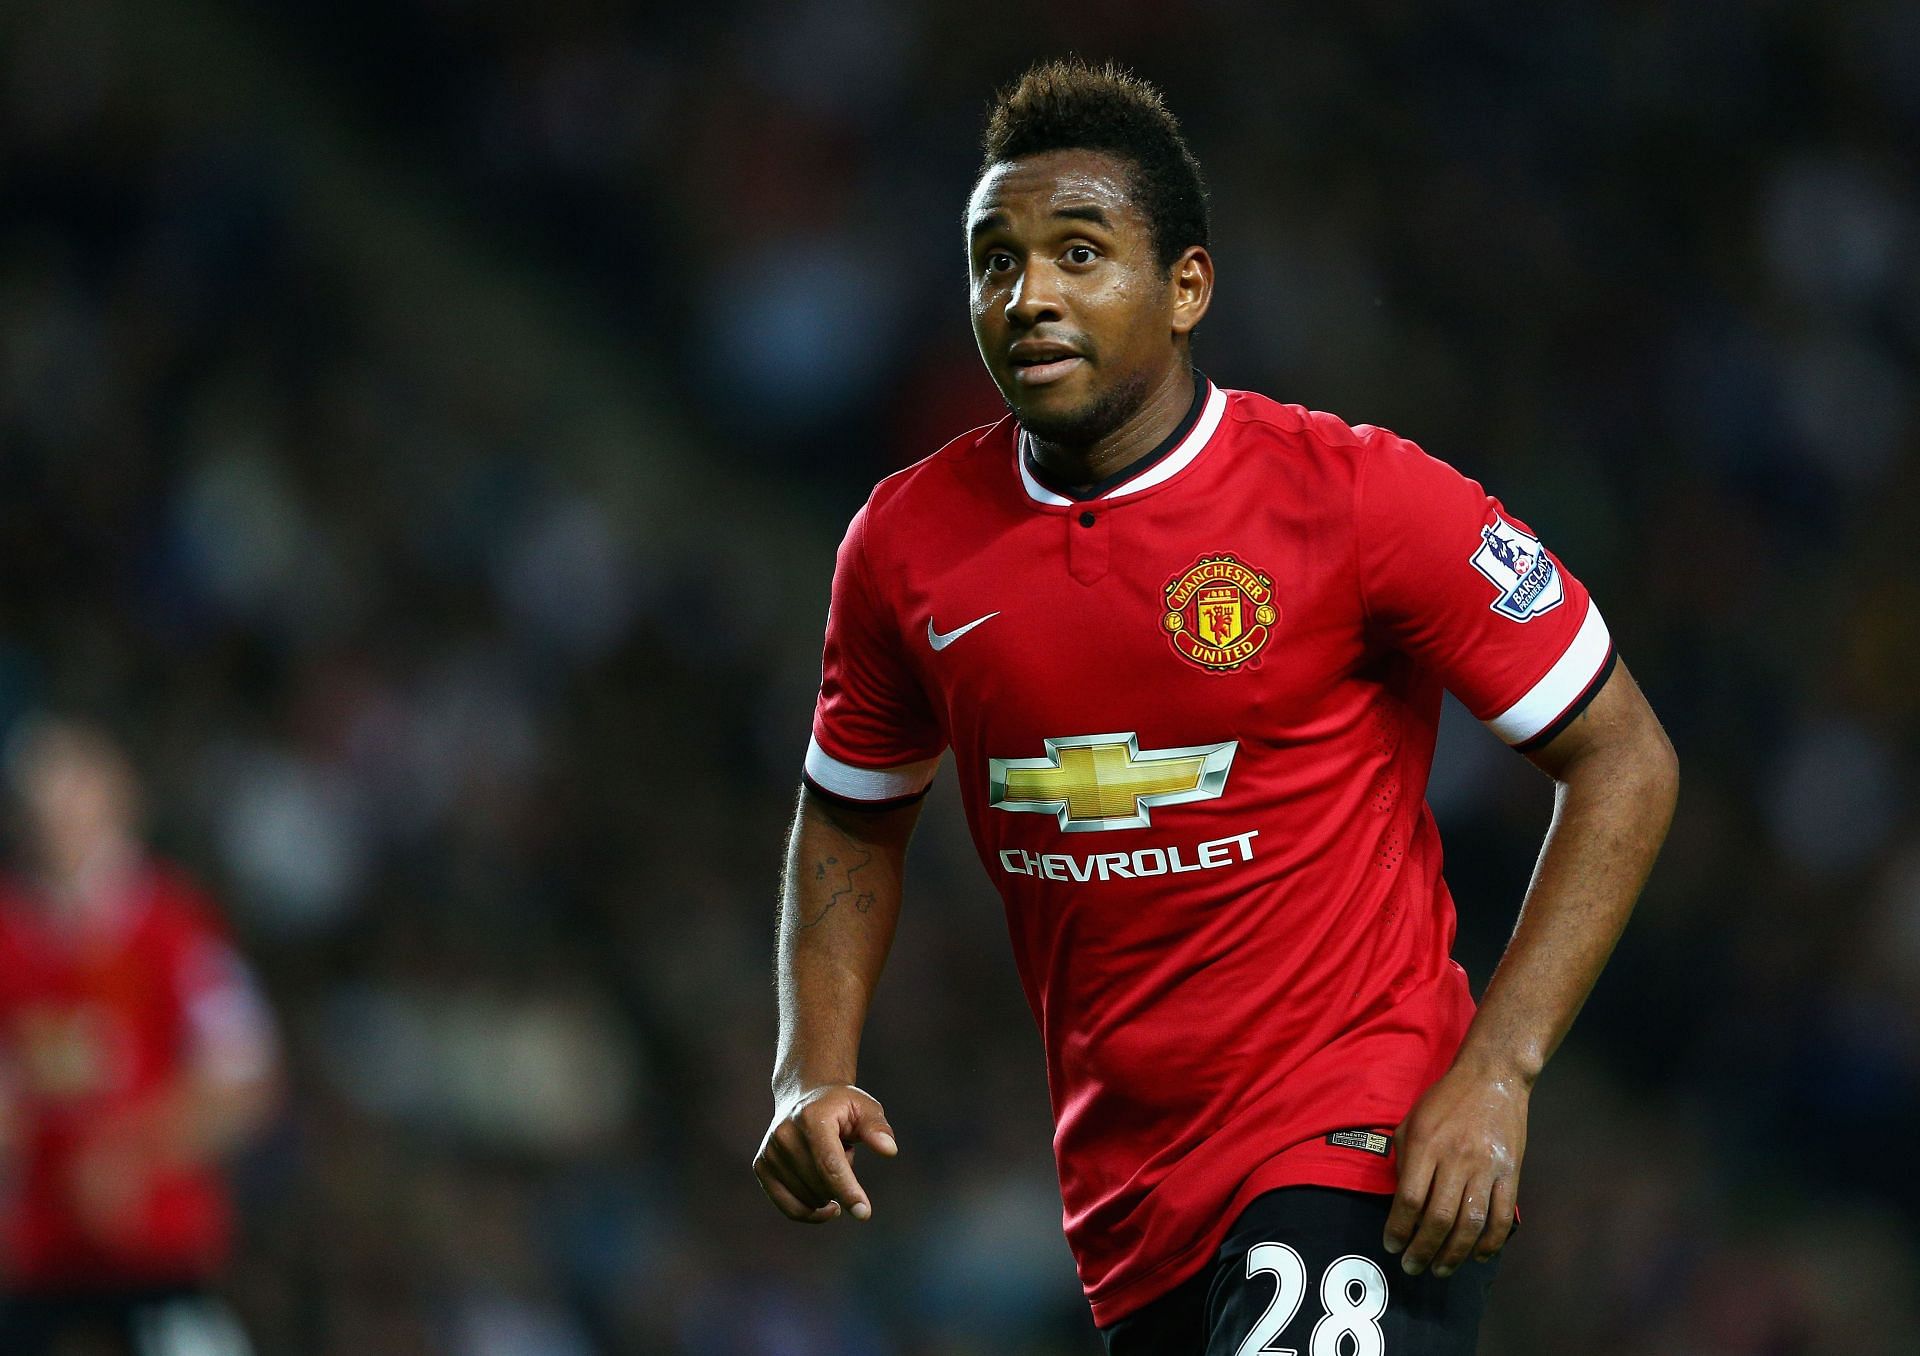 Anderson came to Manchester United as one of the most highly-rated youngsters in Europe.